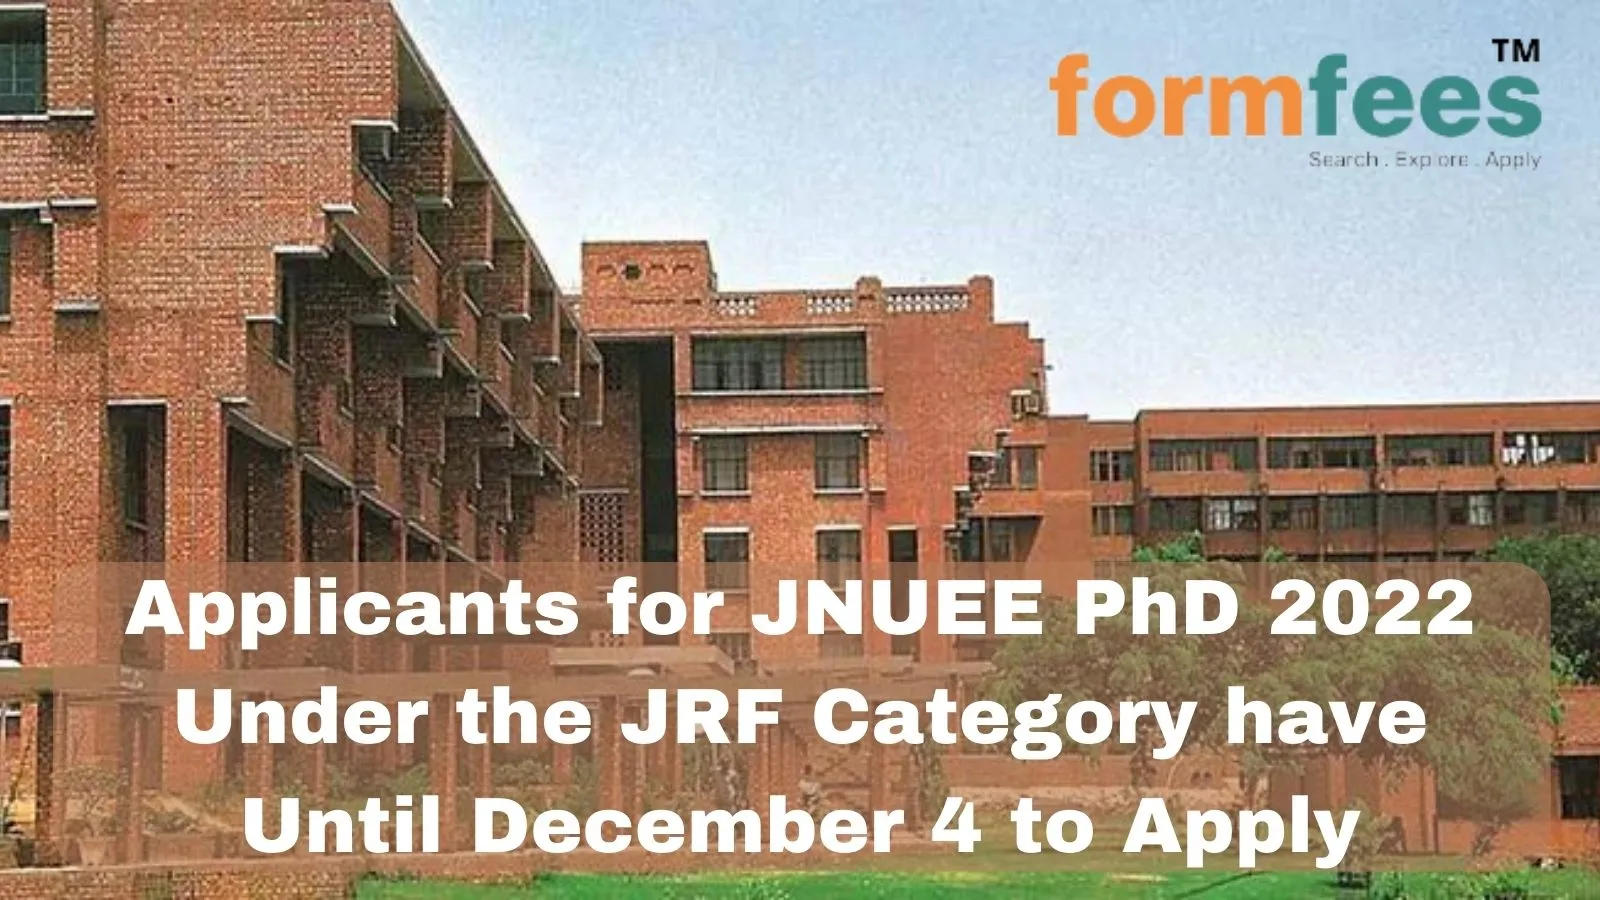 JNUEE PhD 2022 Under the JRF Category